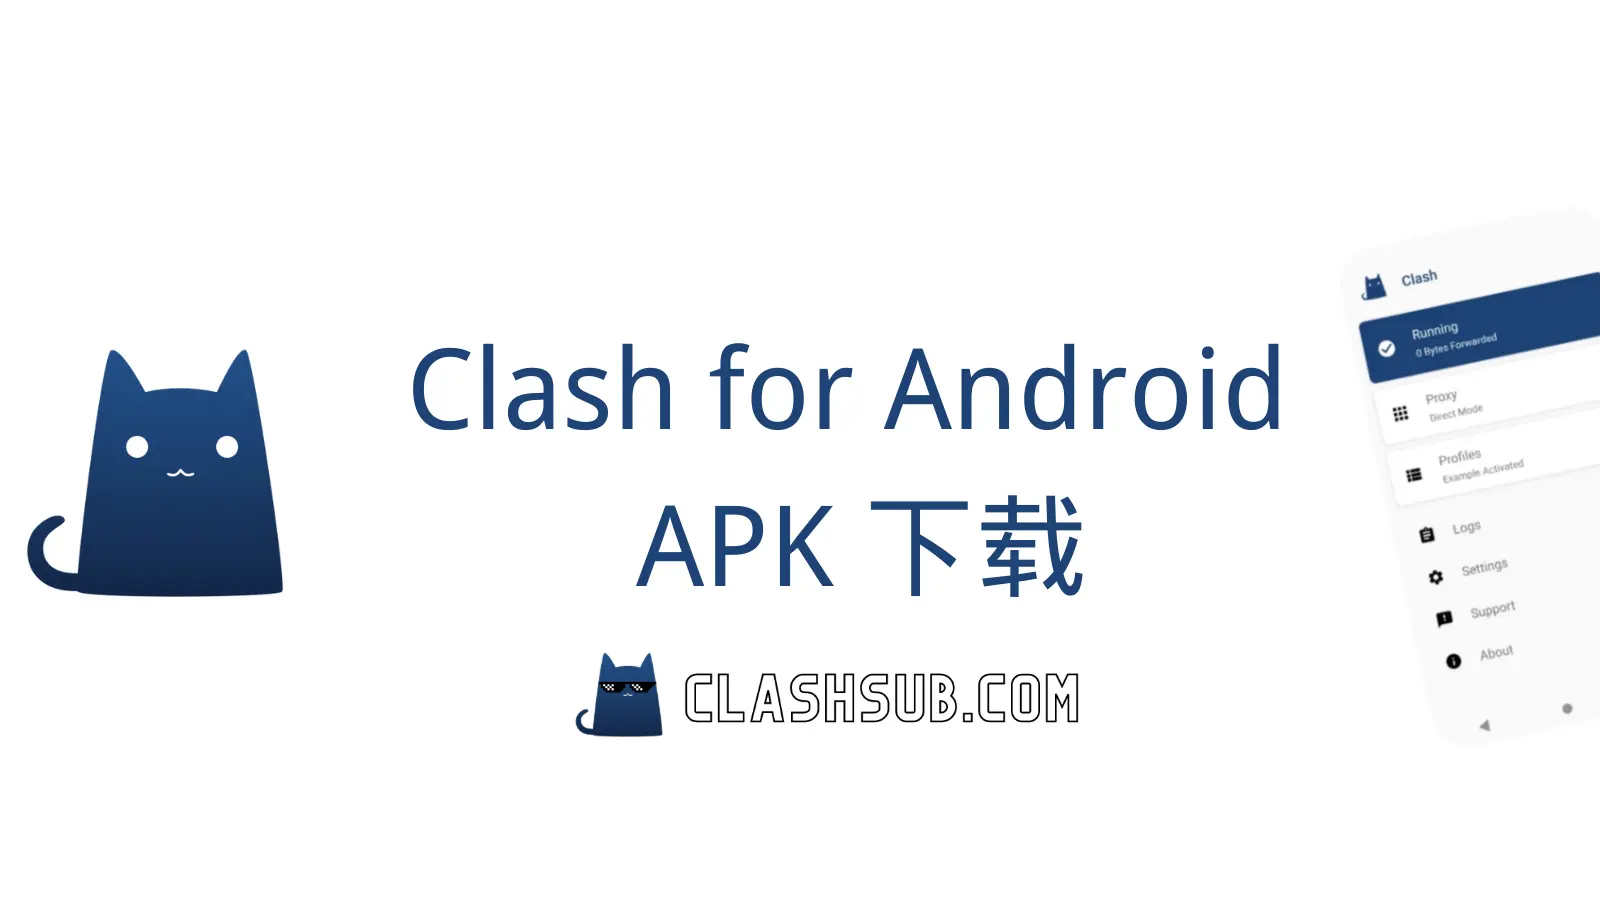 Clash for Android APK 下载